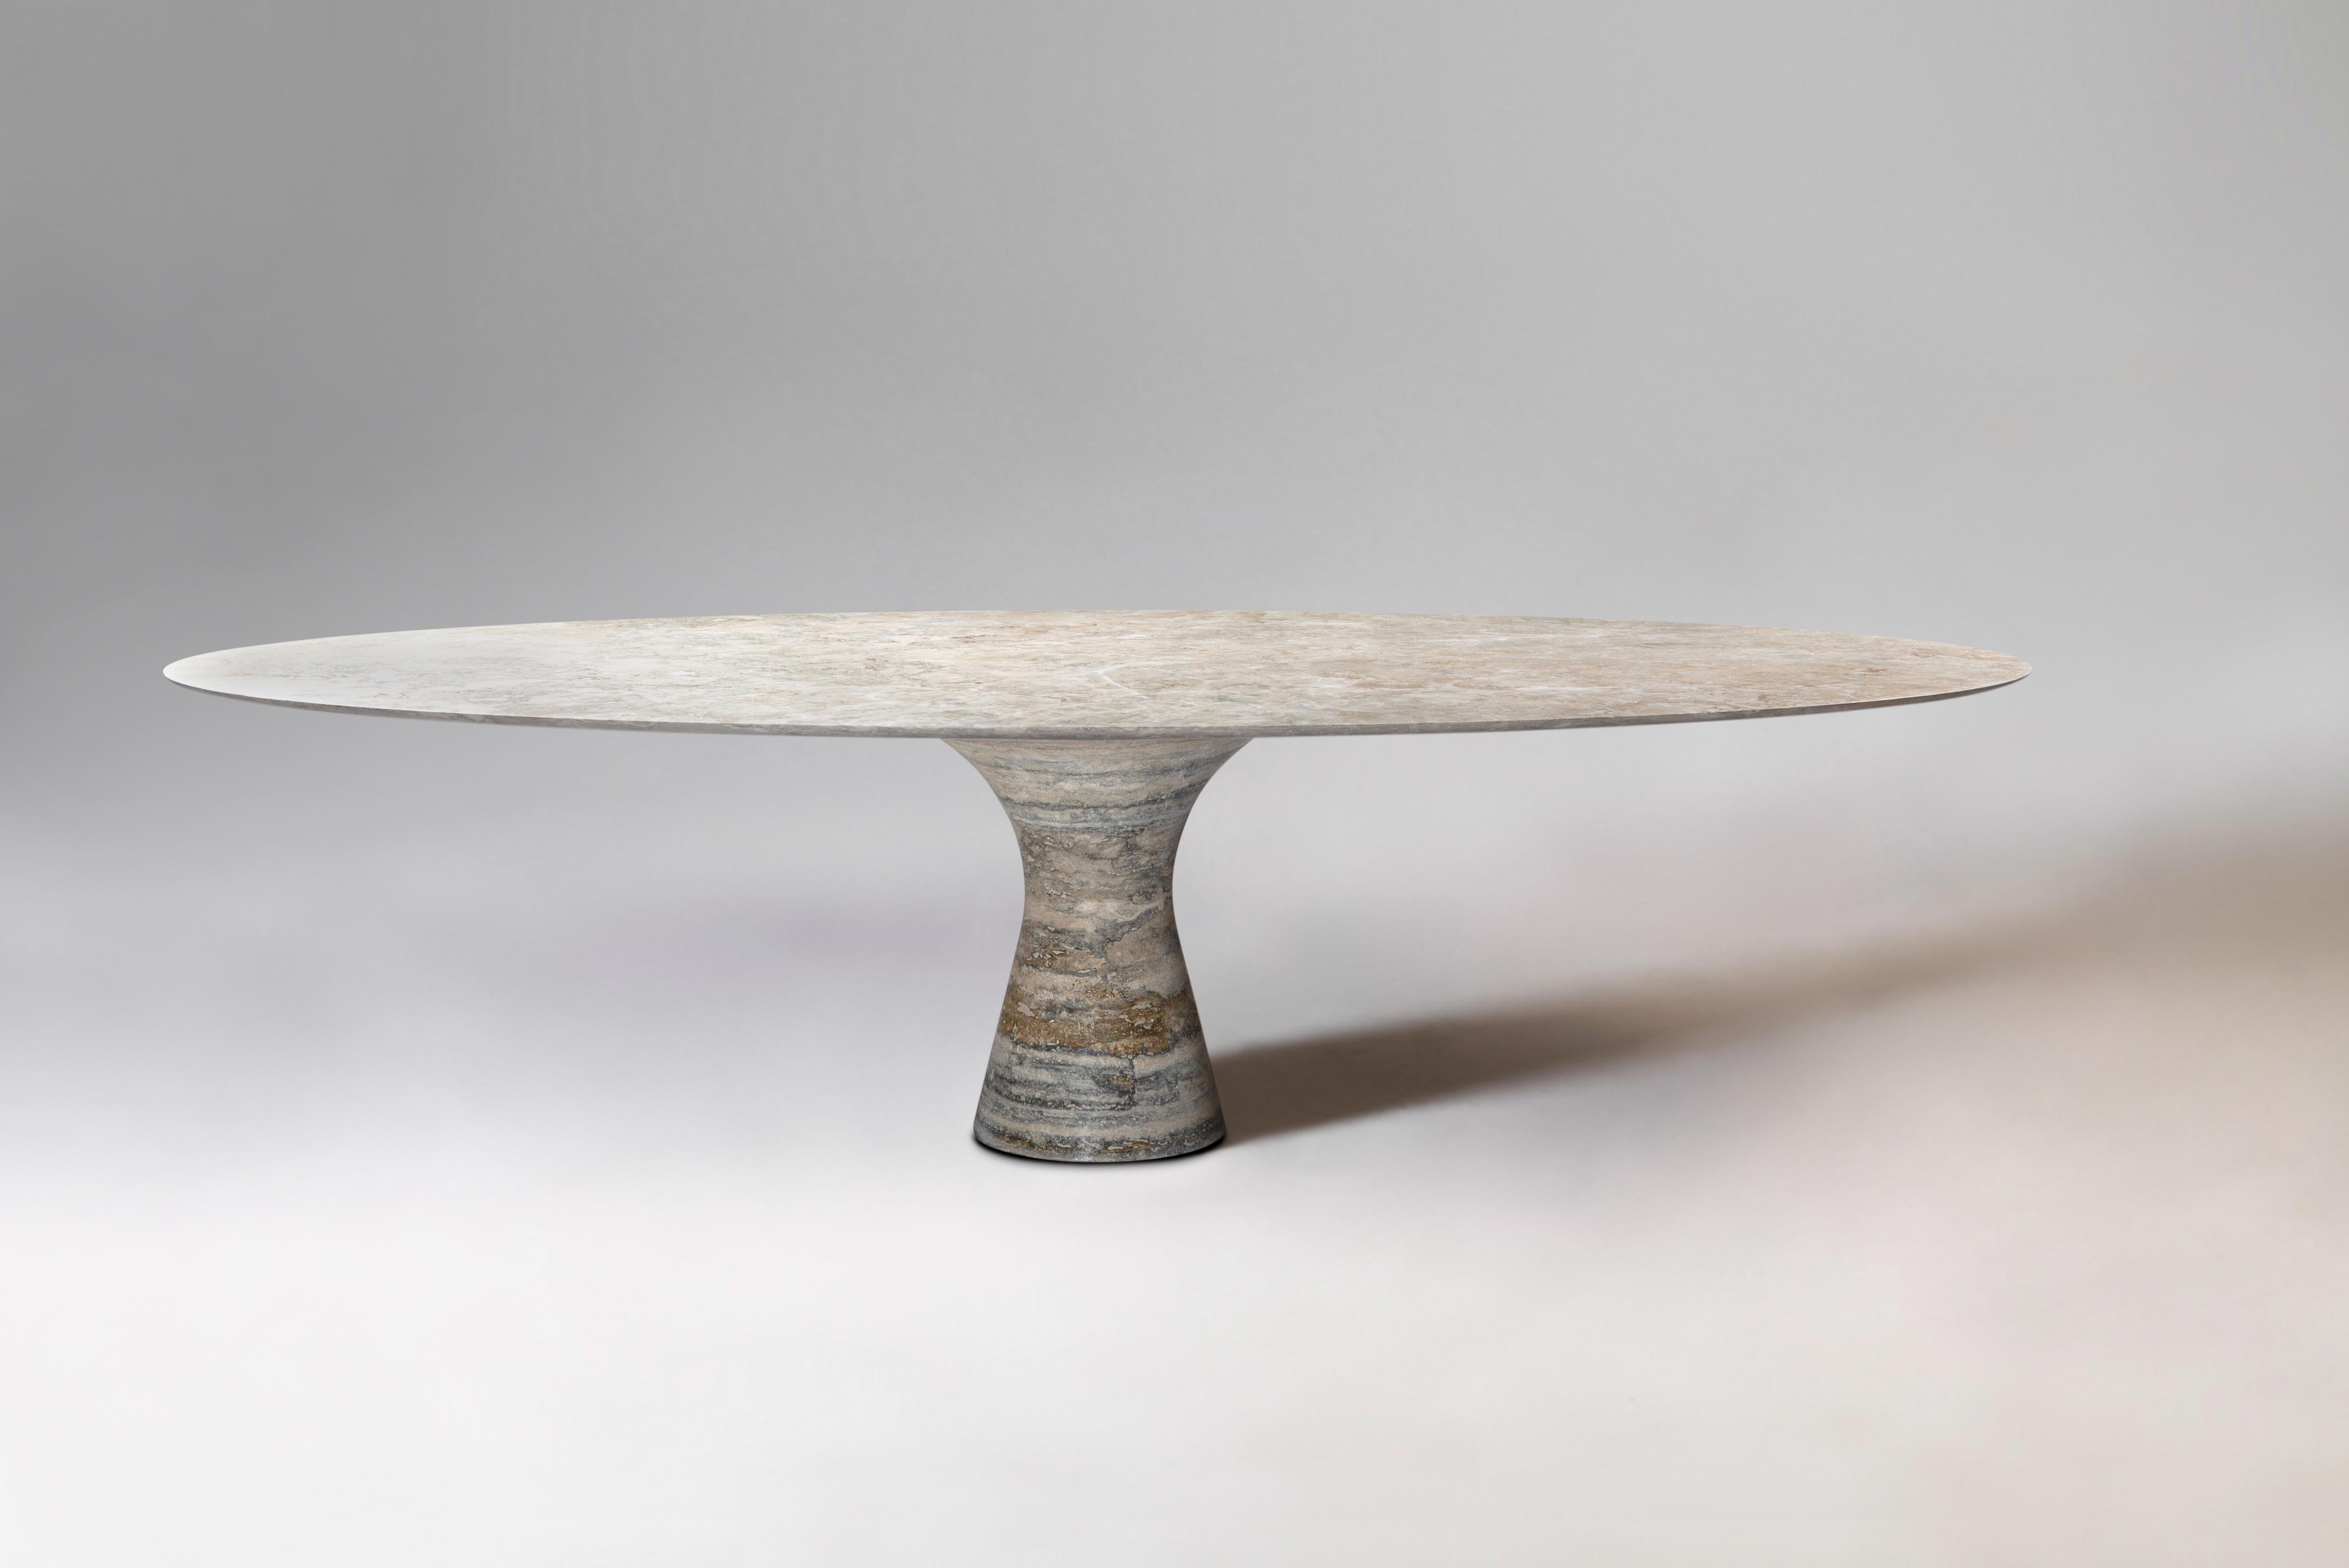 Port Saint Laurent Refined Contemporary Marble Oval Table 210/75 For Sale 1